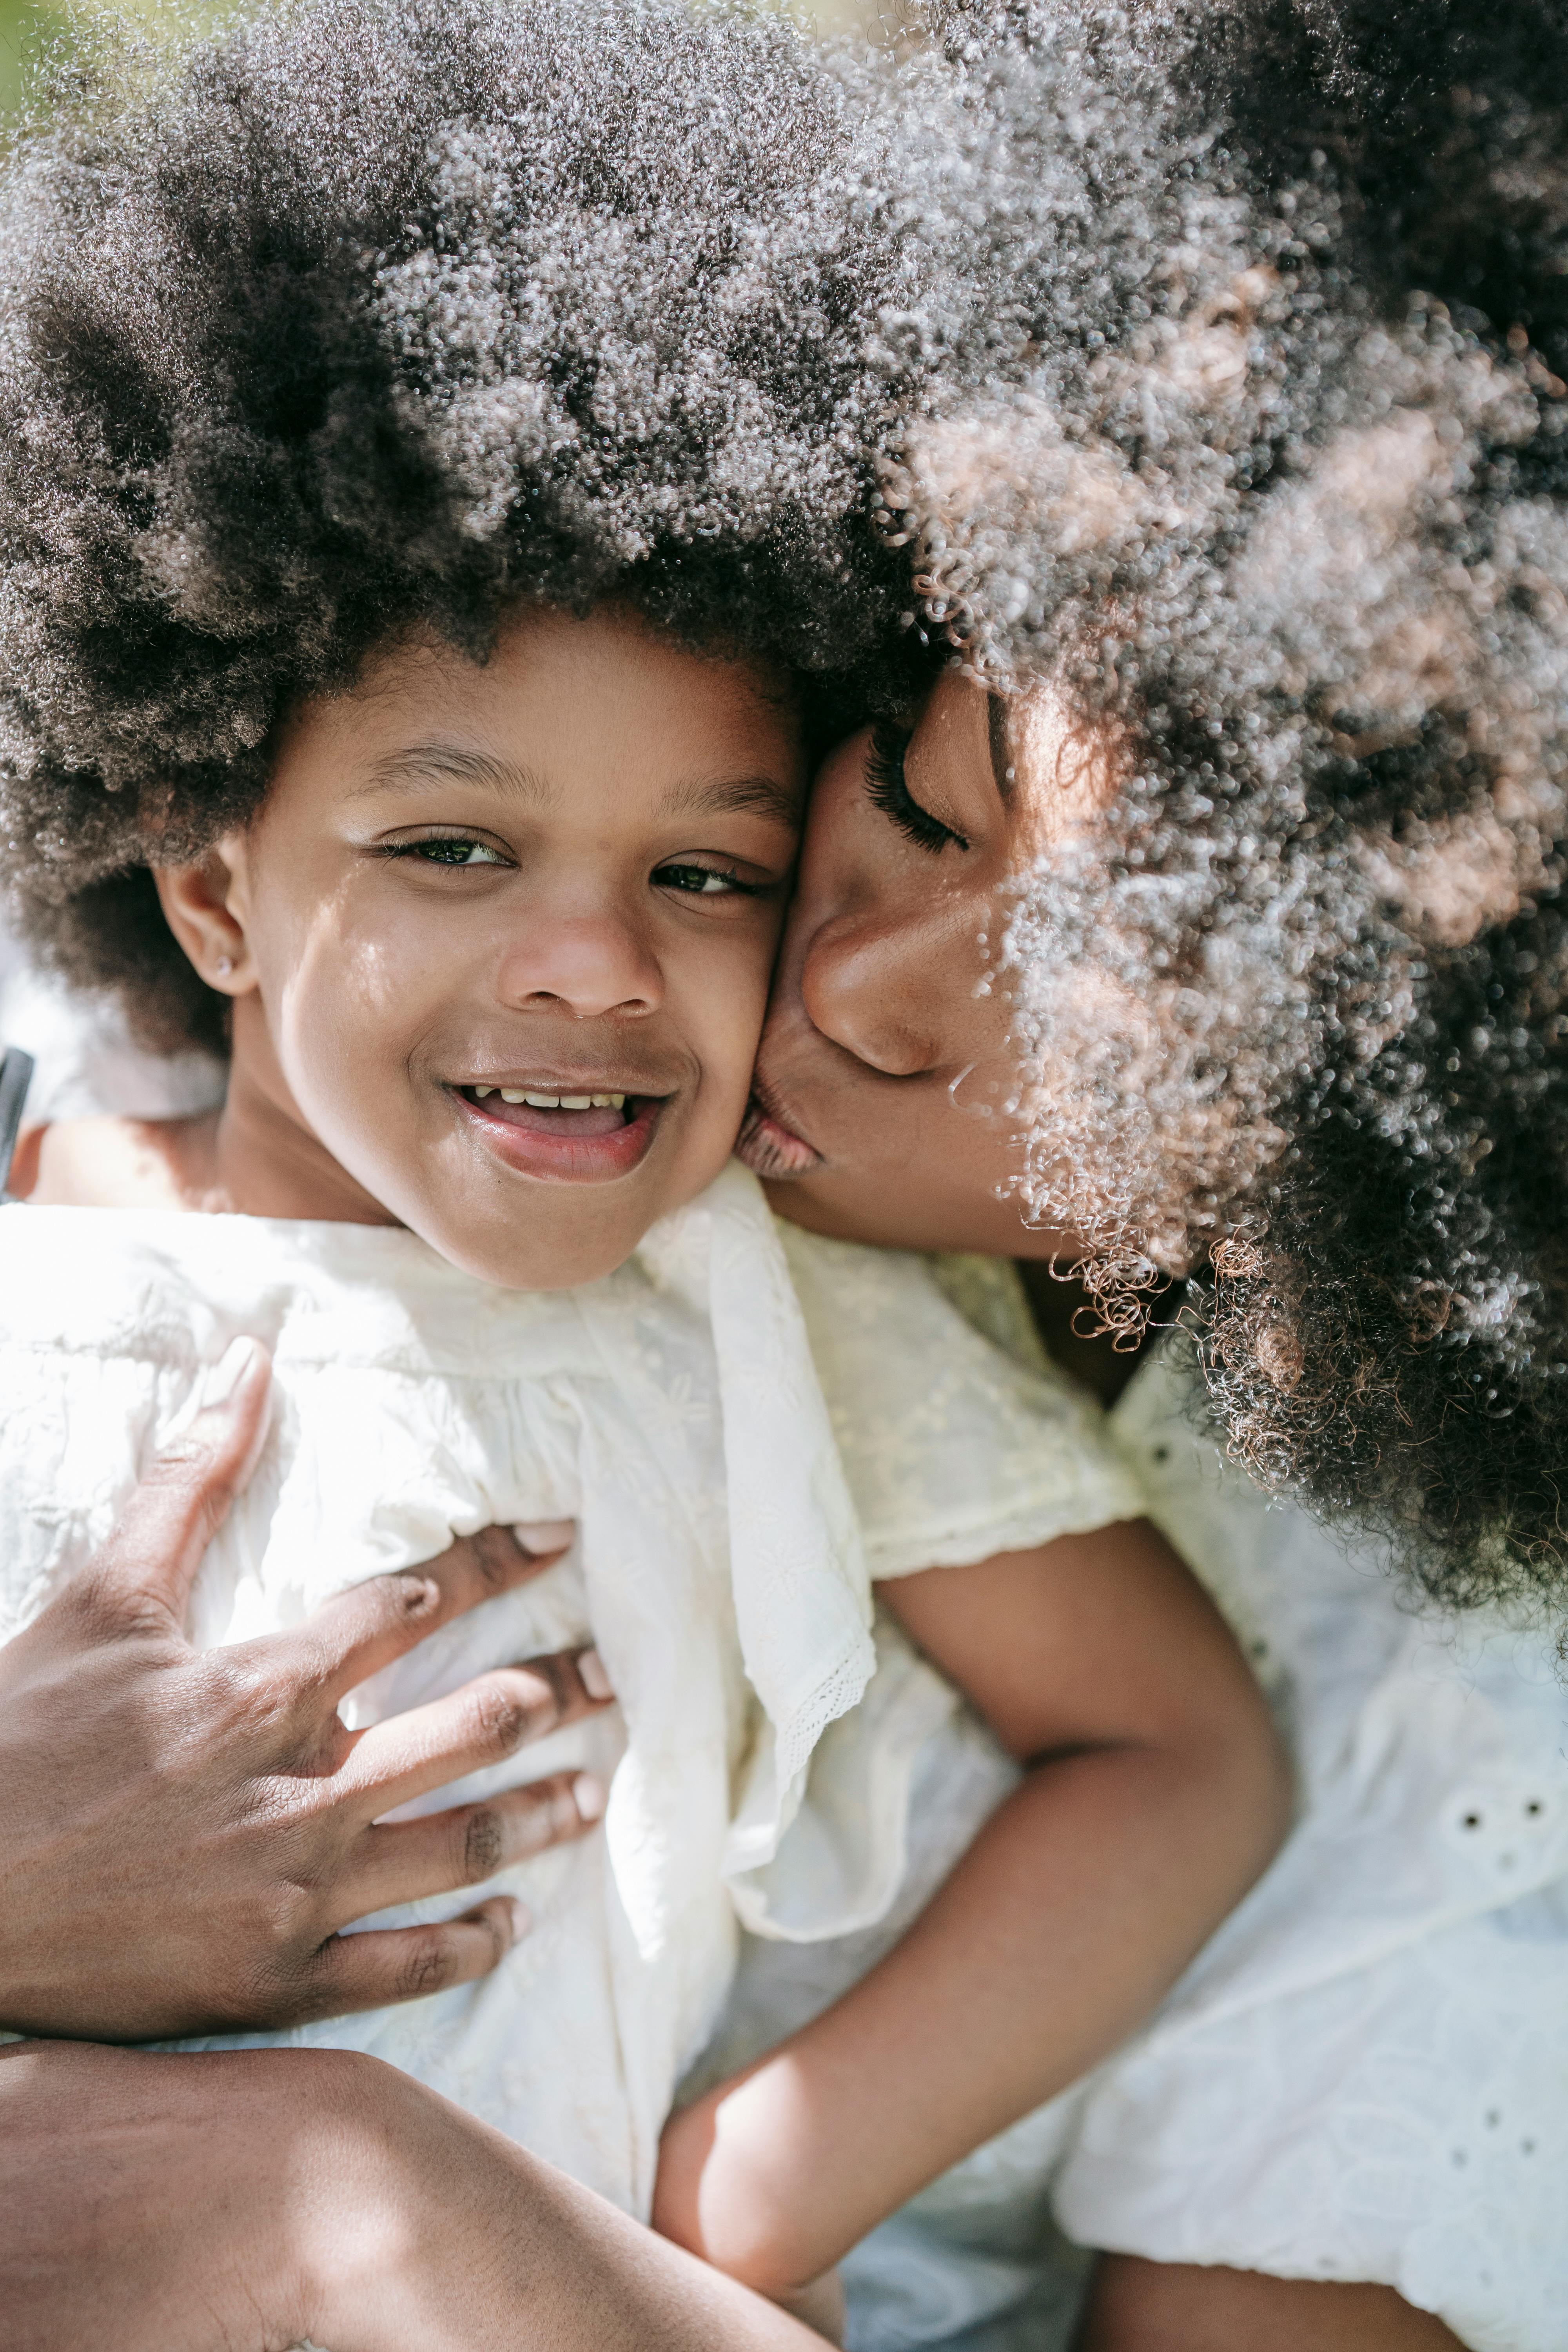 A woman kissing her daughter | Source: Pexels